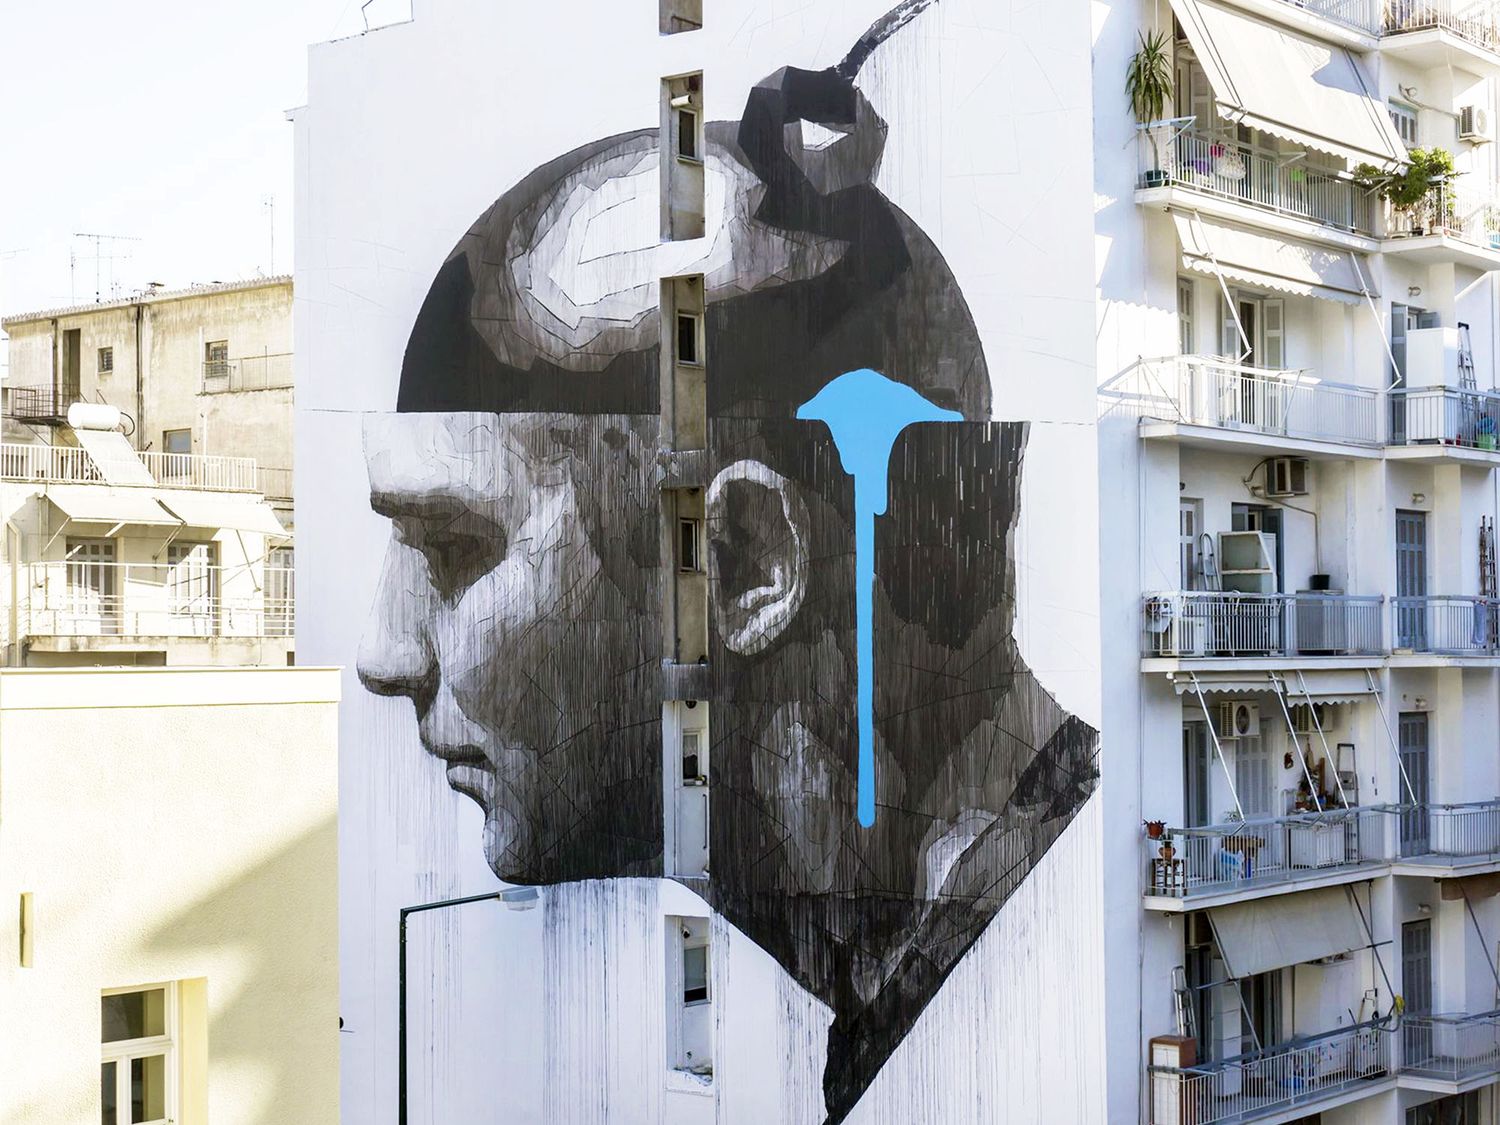 Recognized as one of the greatest Greek street artists, Ino uses walls as giant canvases to convey social messages and interact with the Greek people, here the mural "Mind control" (©Ino.net).